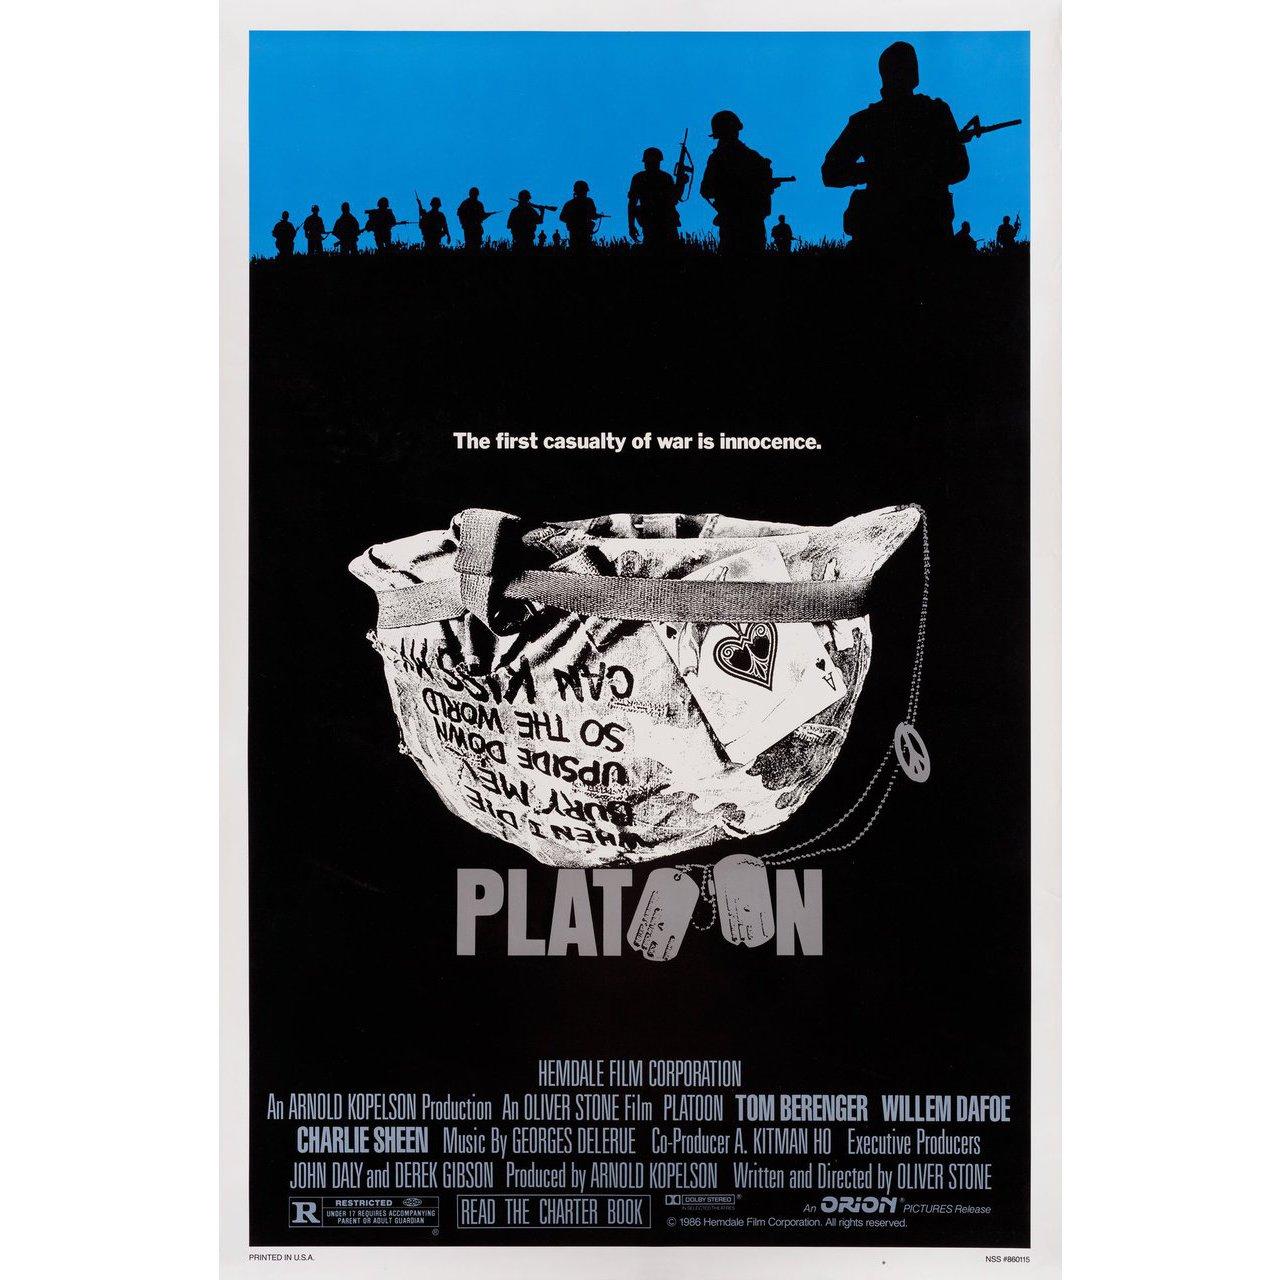 Original 1986 U.S. one sheet poster by Larry Lurin for the film Platoon directed by Oliver Stone with Keith David / Forest Whitaker / Francesco Quinn / Kevin Dillon. Very Good-Fine condition, rolled with small hole at bottom. Please note: the size